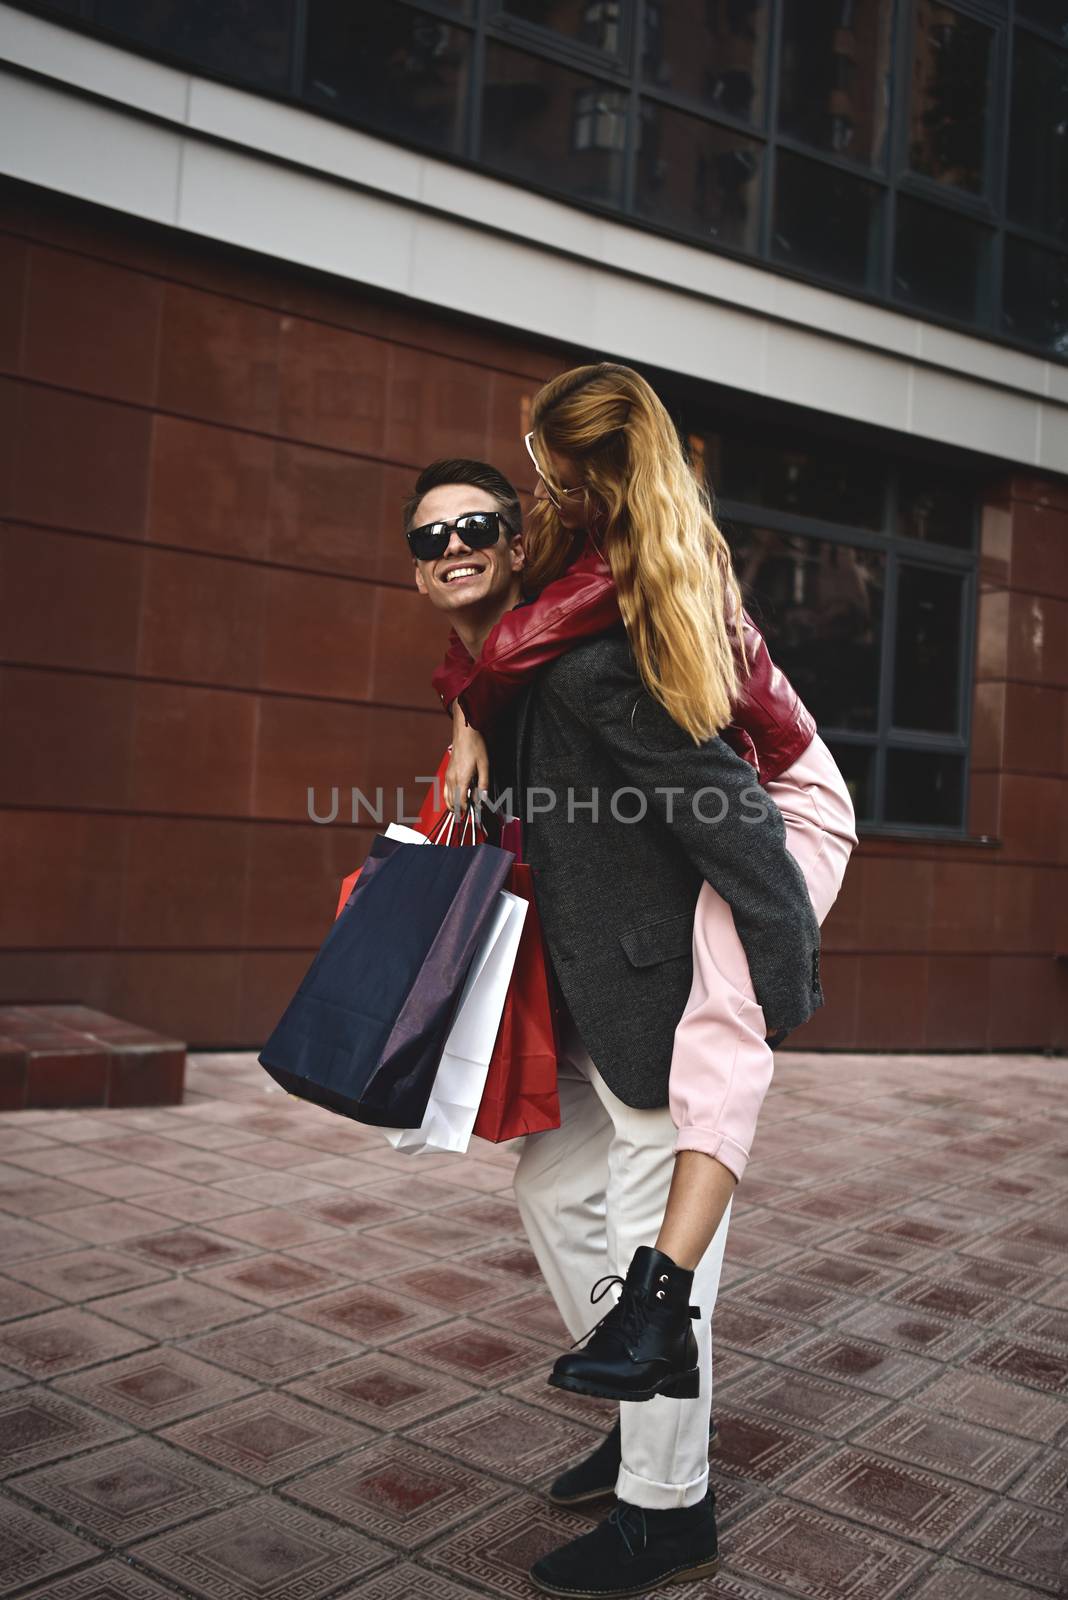 Couple in shopping together. Happy couple shopping together and having fun. Boyfriend carrying his girlfriend on the piggyback. by Nickstock